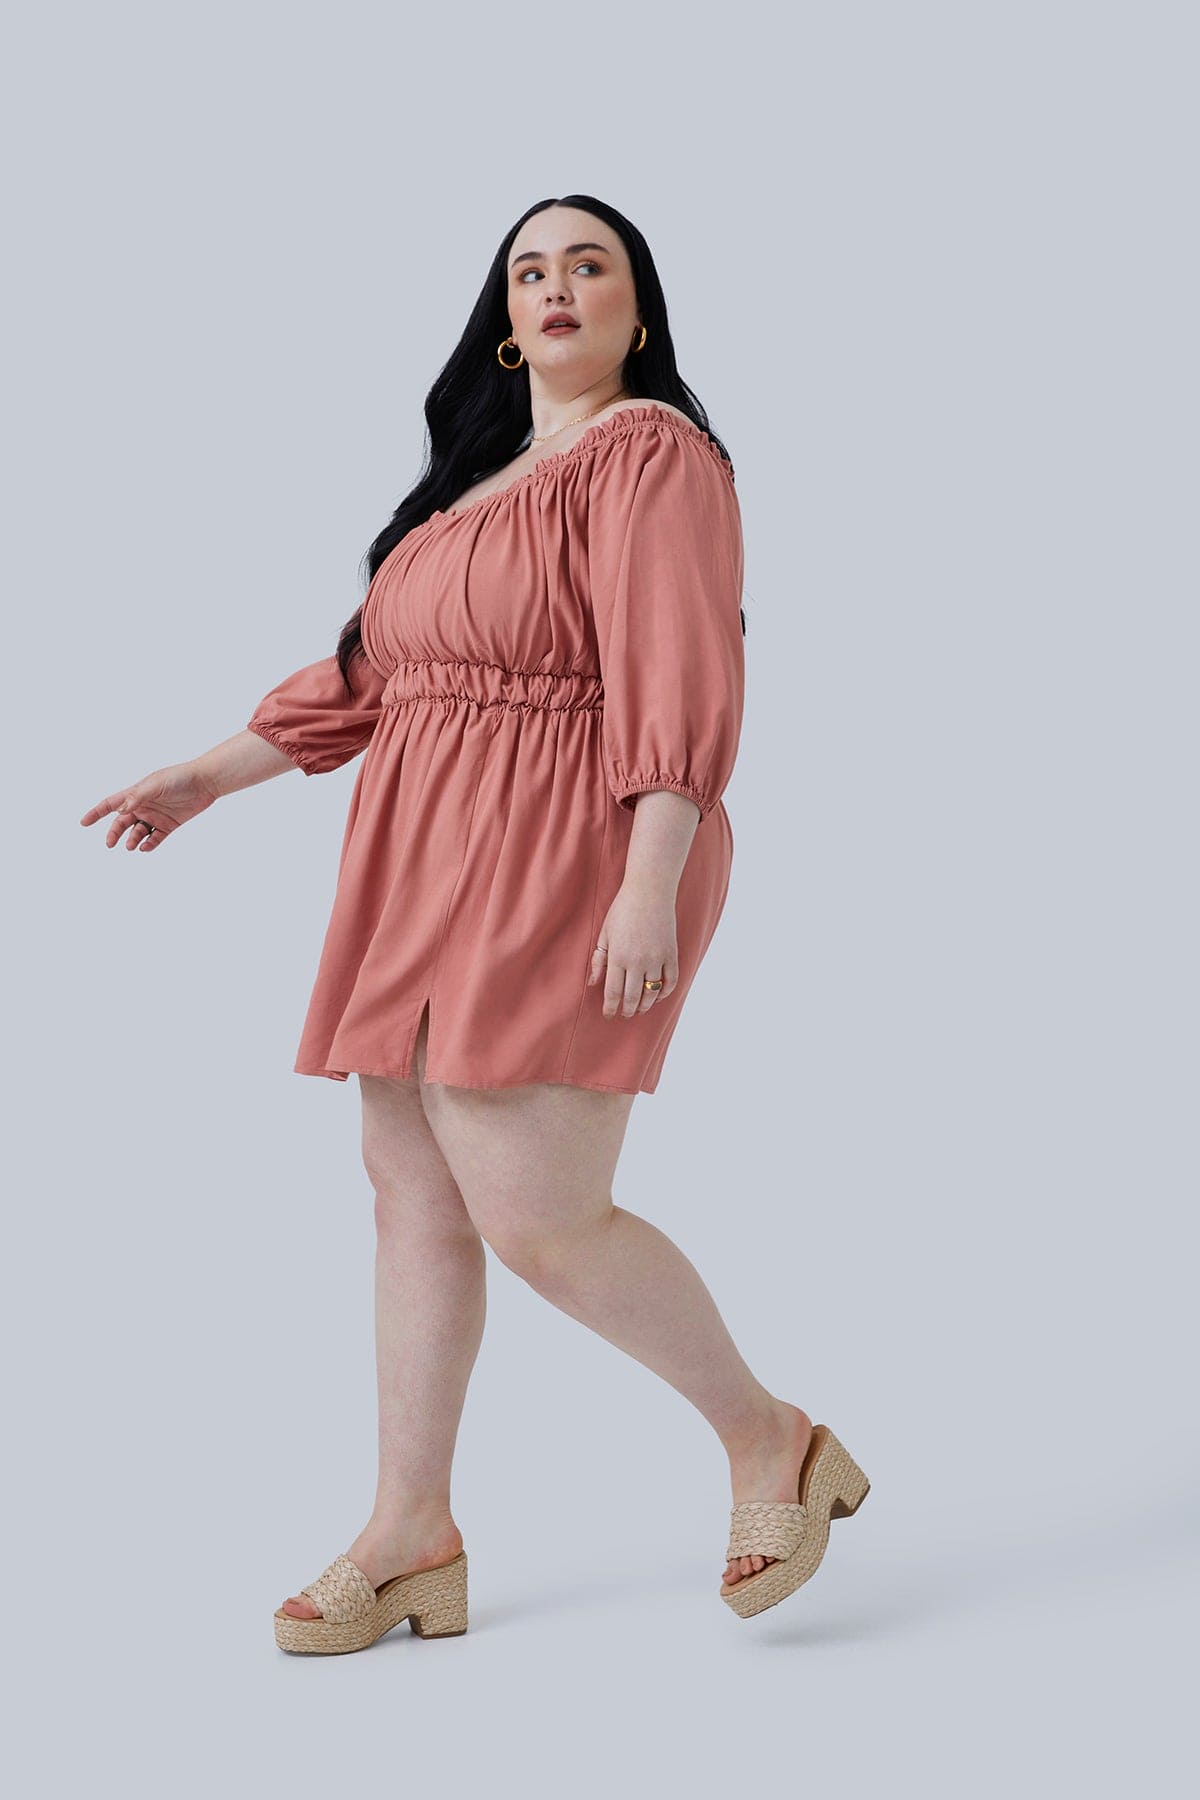 Side view of the Gianna Mini Dress in size 3X from Gia IRL Plus Size Boutique. Model is stepping to the side and looking up and over her shoulder. Basic dainty jewelry with this dress for plus size women.